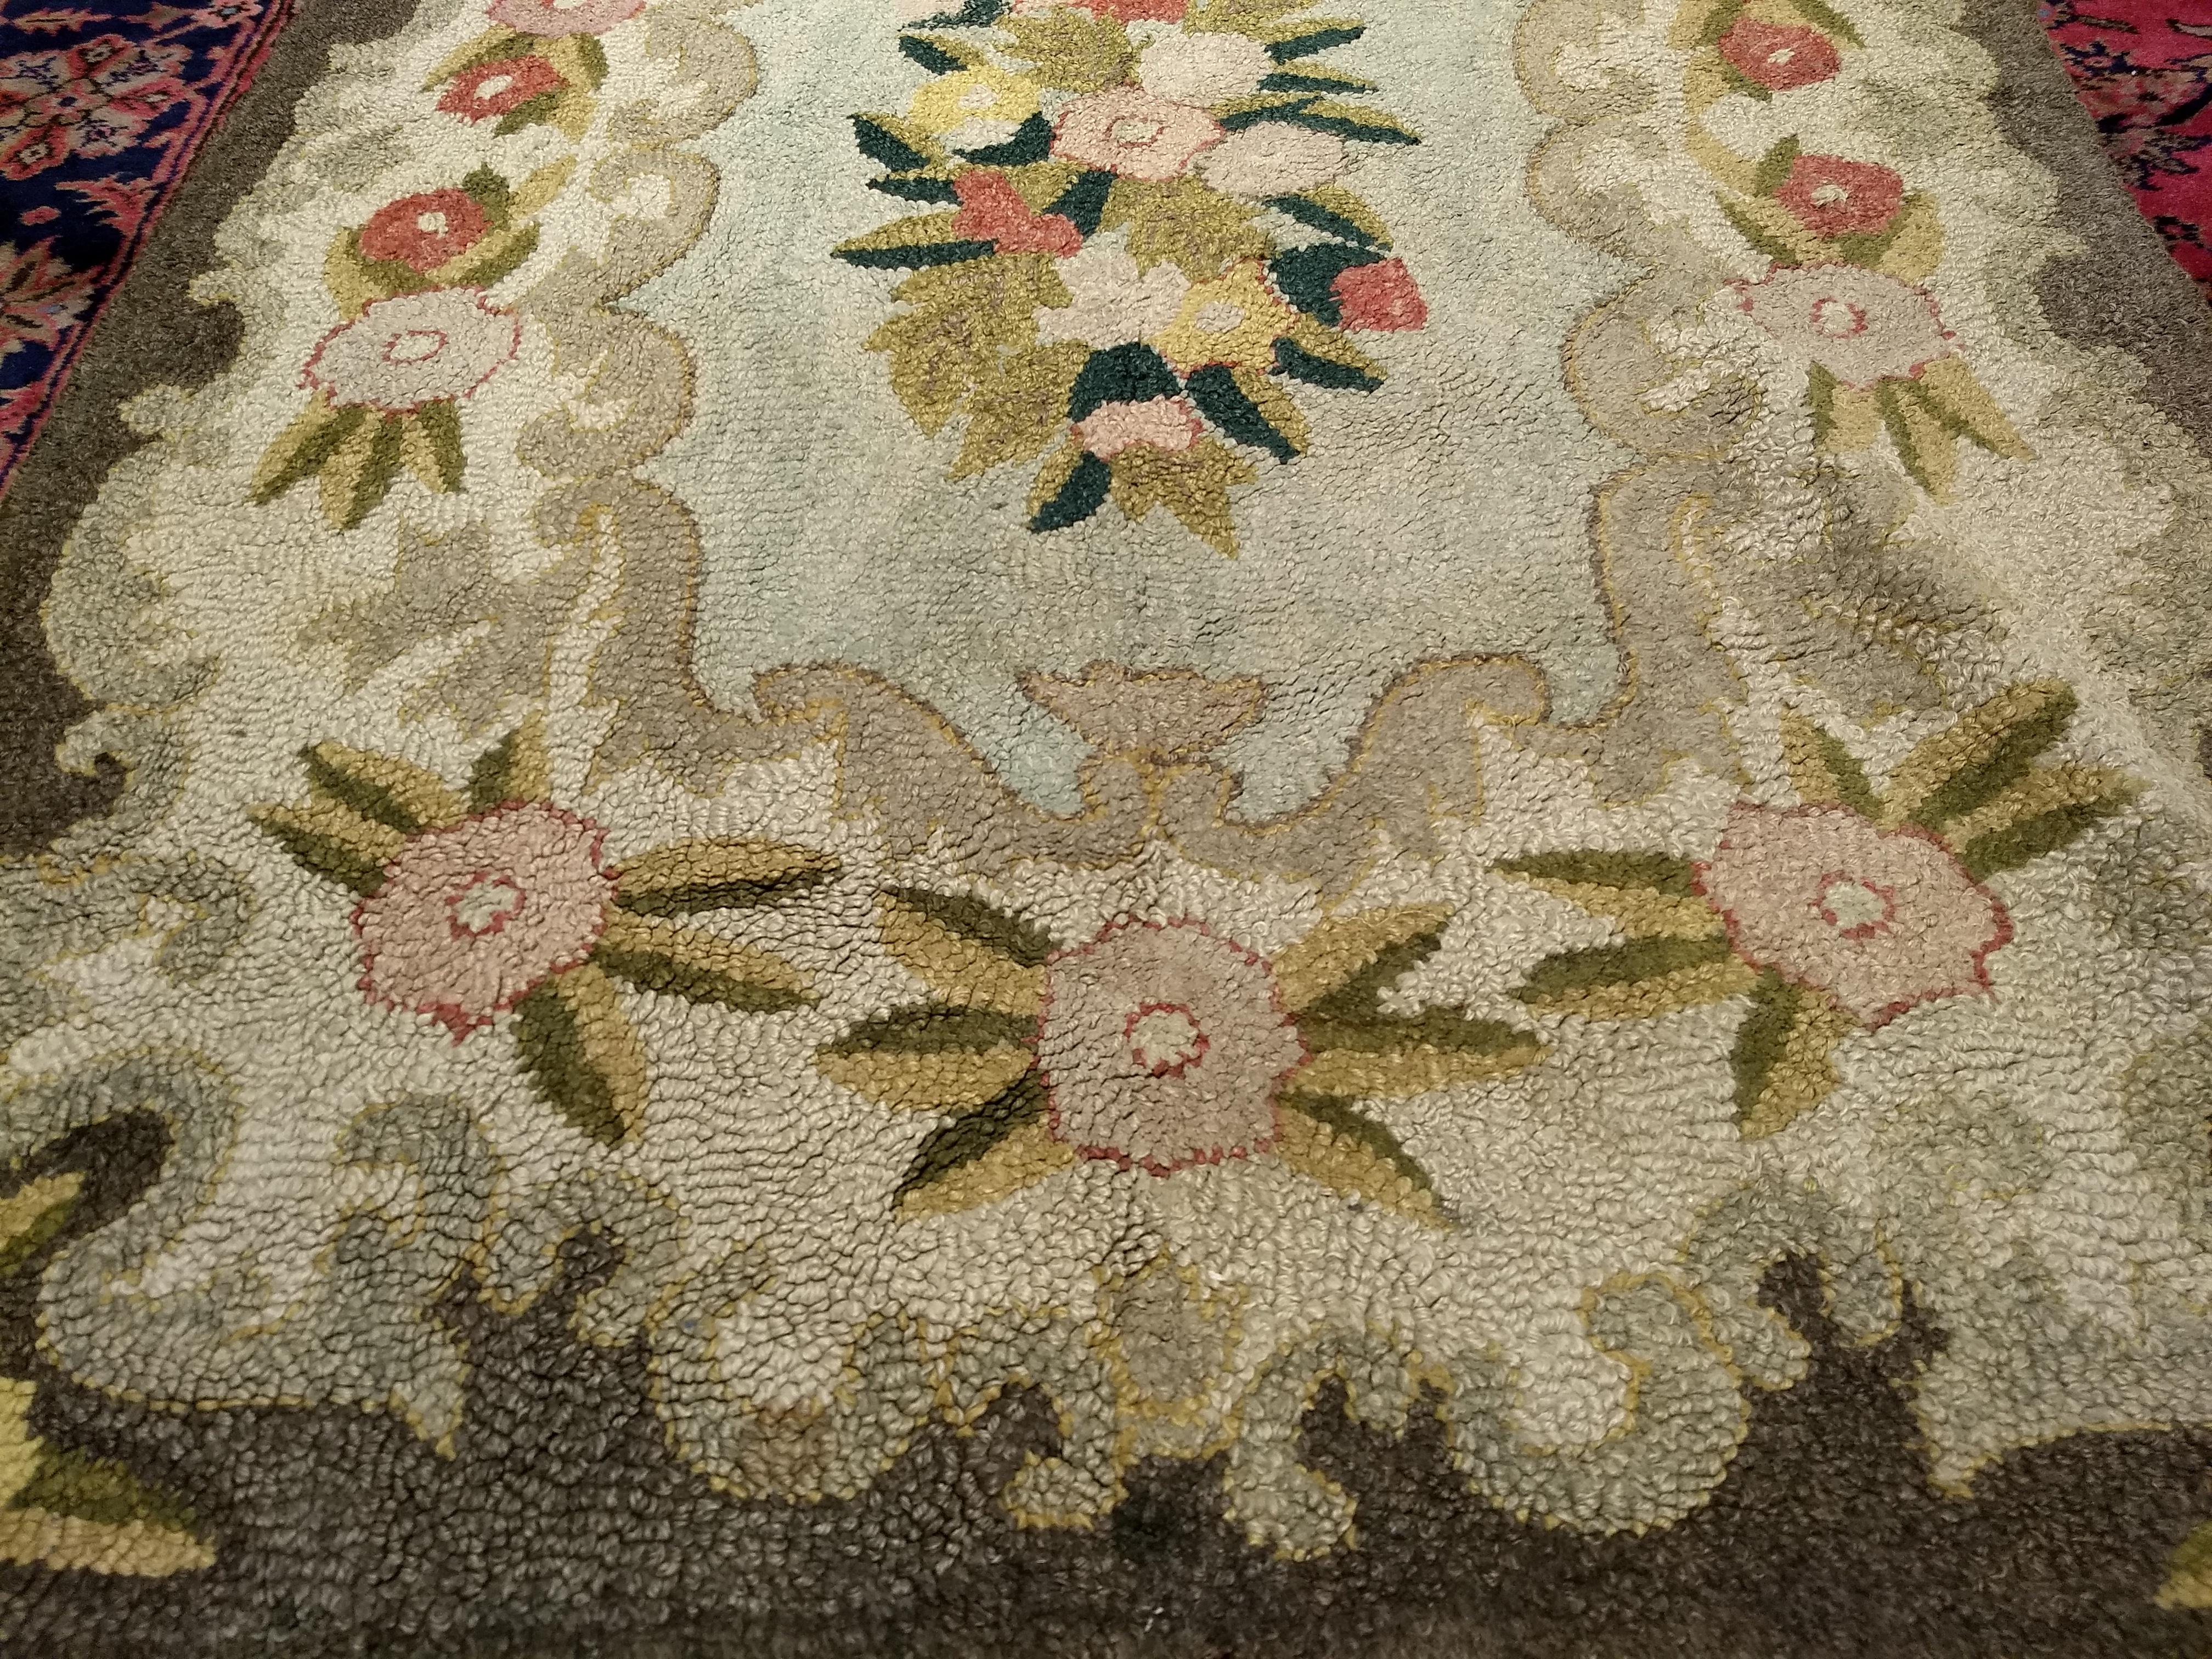 Hand-Crafted Vintage American Hand Hooked Area Rug with a Floral Pattern in Pastel Colors For Sale